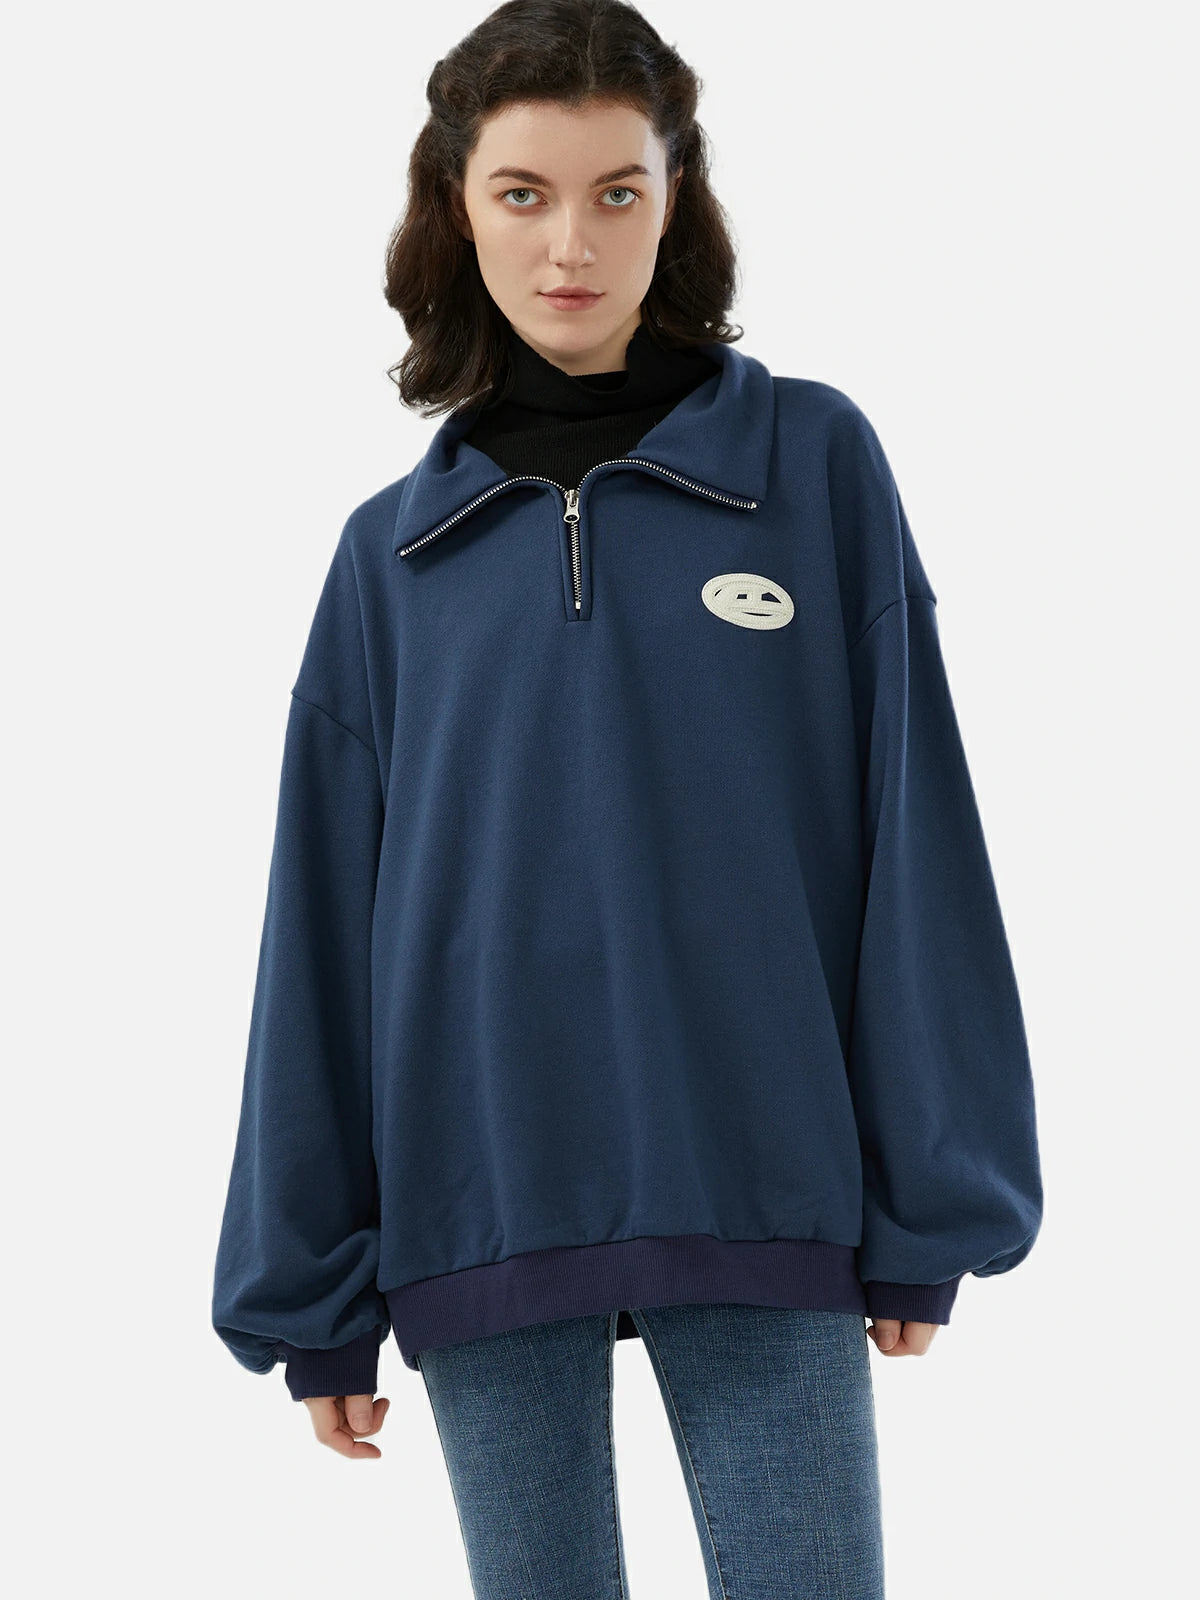 Stylish navy blue pullover with a relaxed fit, perfect for casual occasions